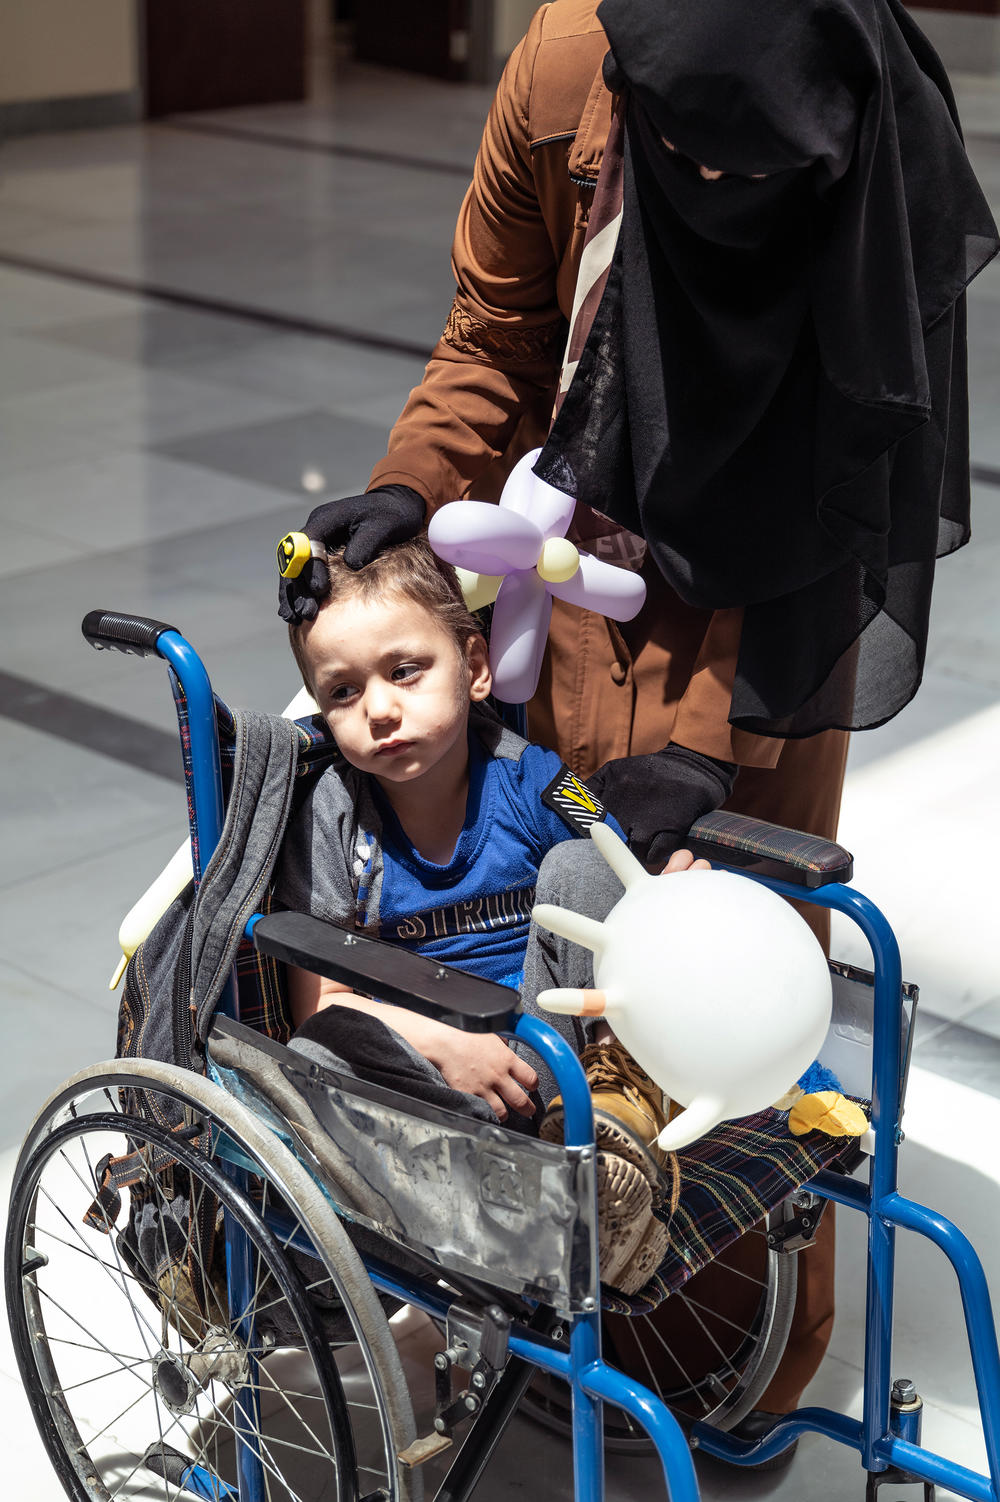 Syrian refugees Narmeen al-Zamel, 34, and her 3-year-old son Khaled wait in the lobby of the King Hussein Cancer Center in Amman, Jordan. Khaled has leukemia and is receiving treatment at this hospital. Khaled's father, Thaer al-Rahal, was one of the people who drowned after the boat they were traveling in sank off Greece.